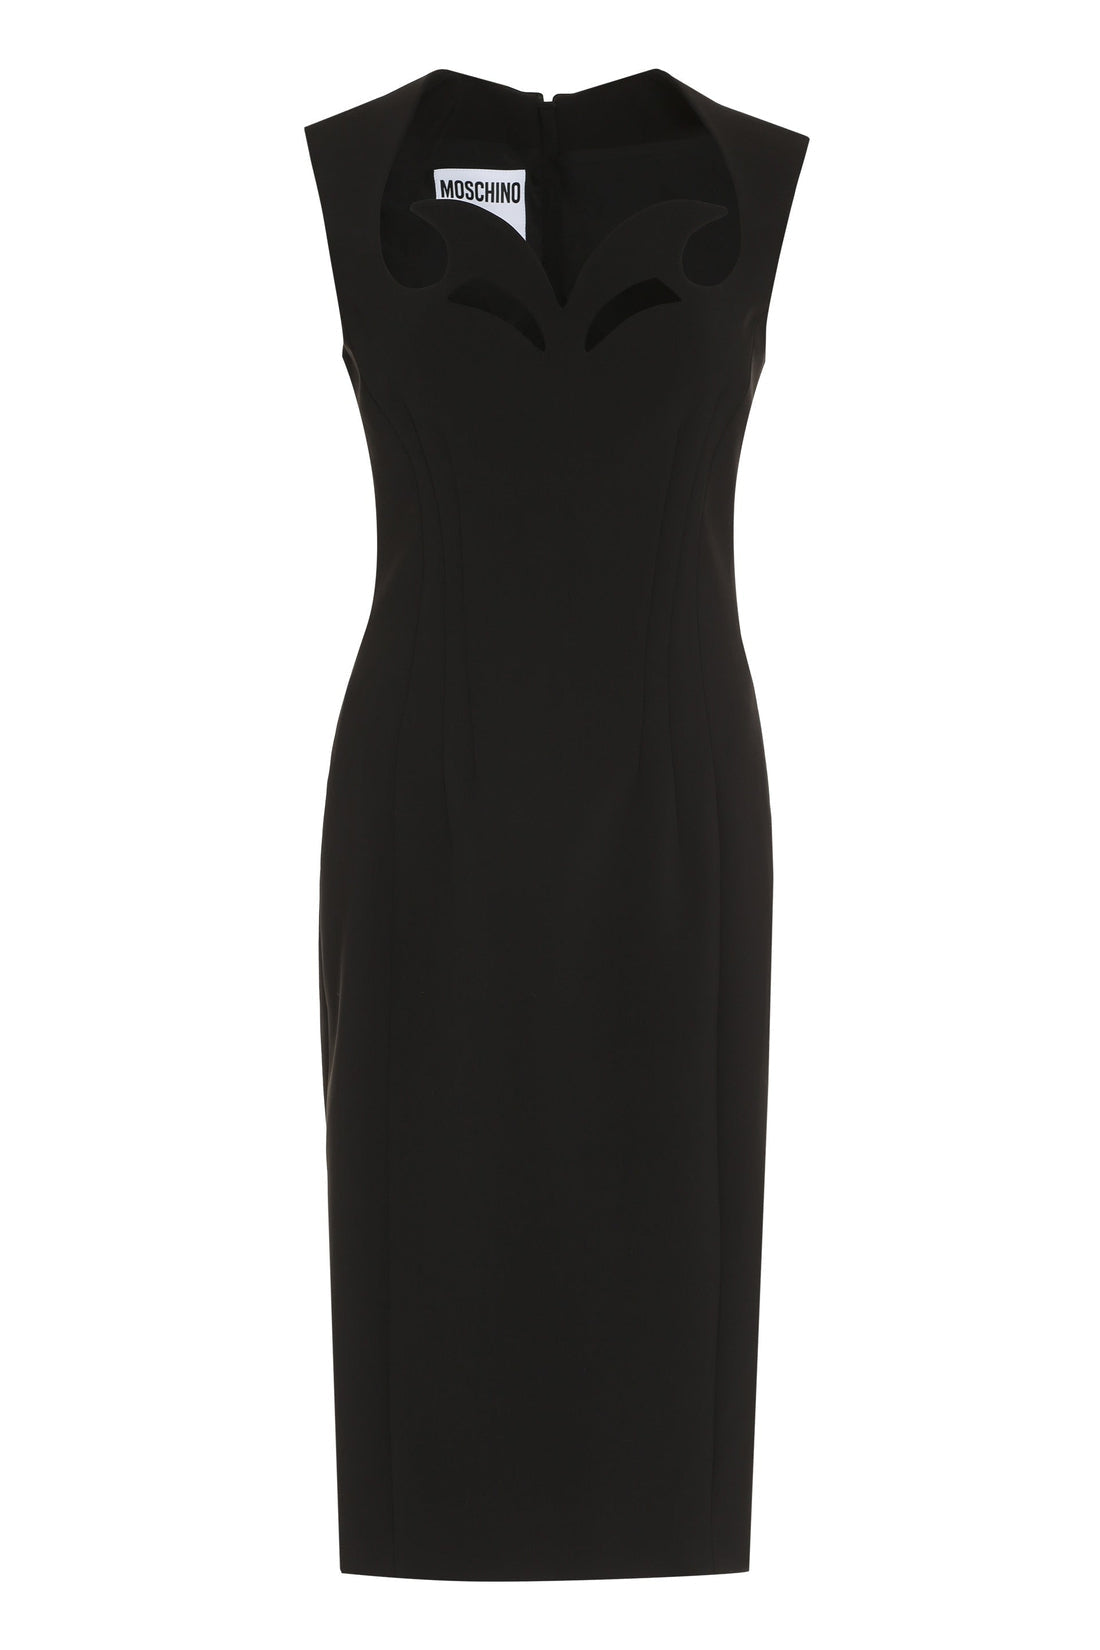 Moschino-OUTLET-SALE-Crepe sheath dress-ARCHIVIST